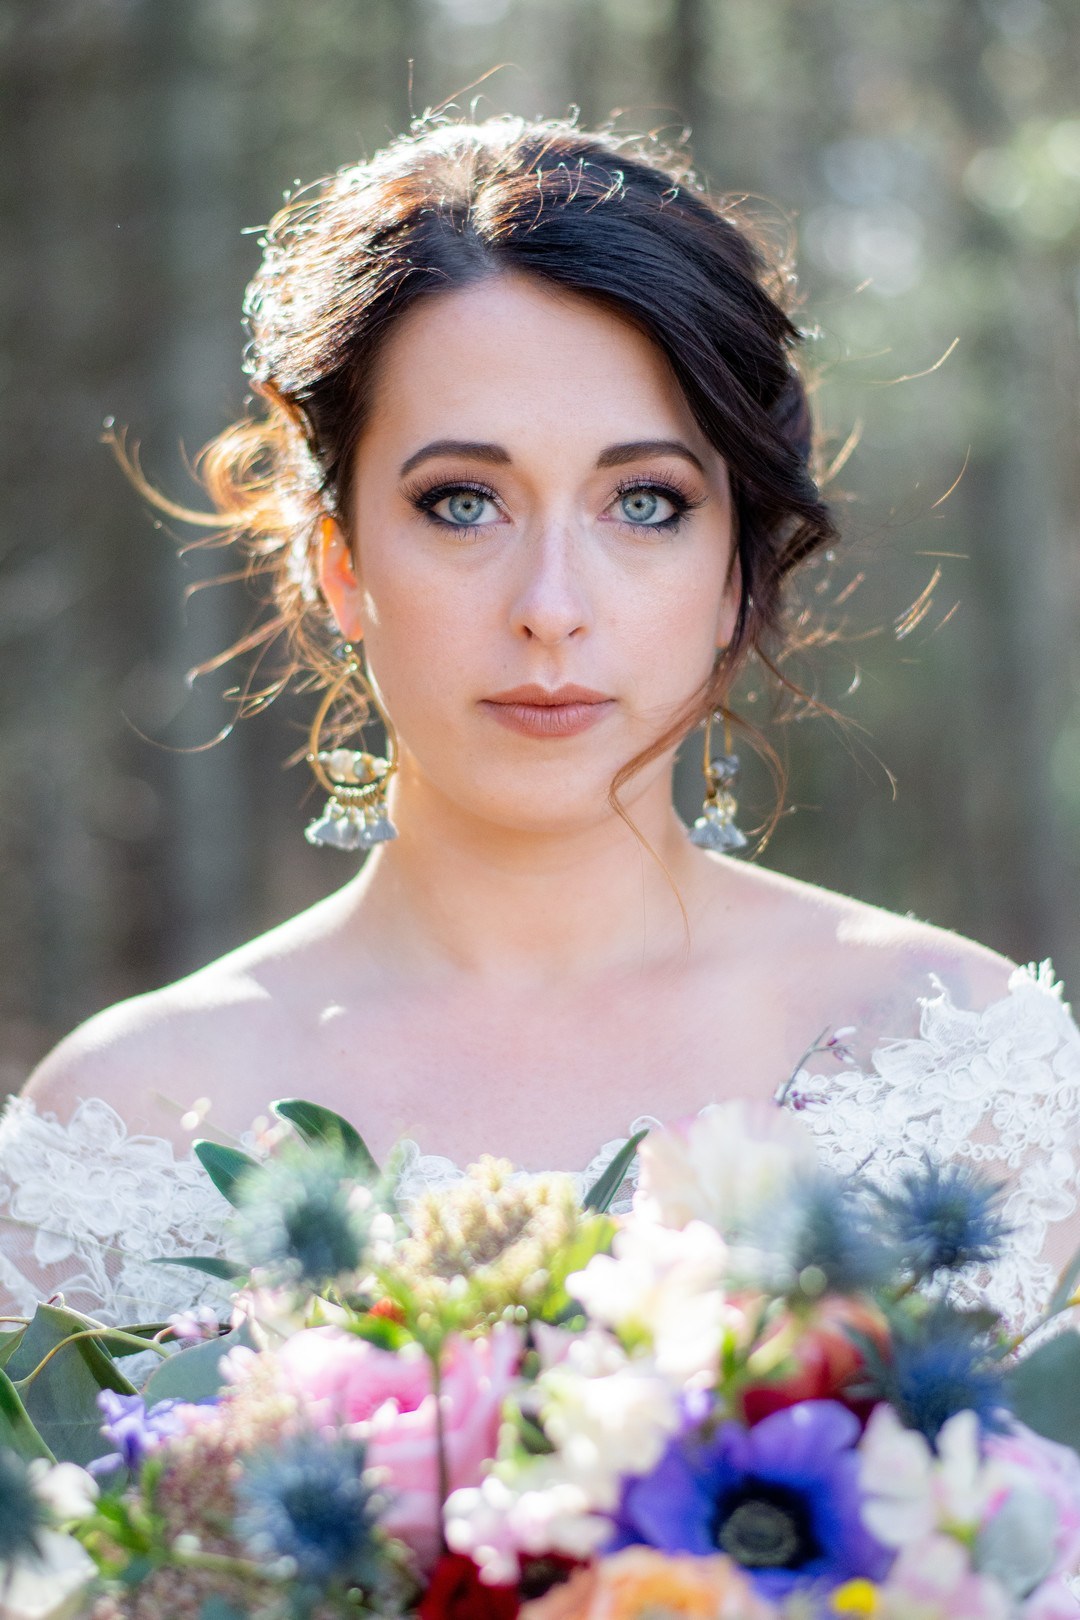 The bride was rocking blue statement earrings with tassels that matched her eyes